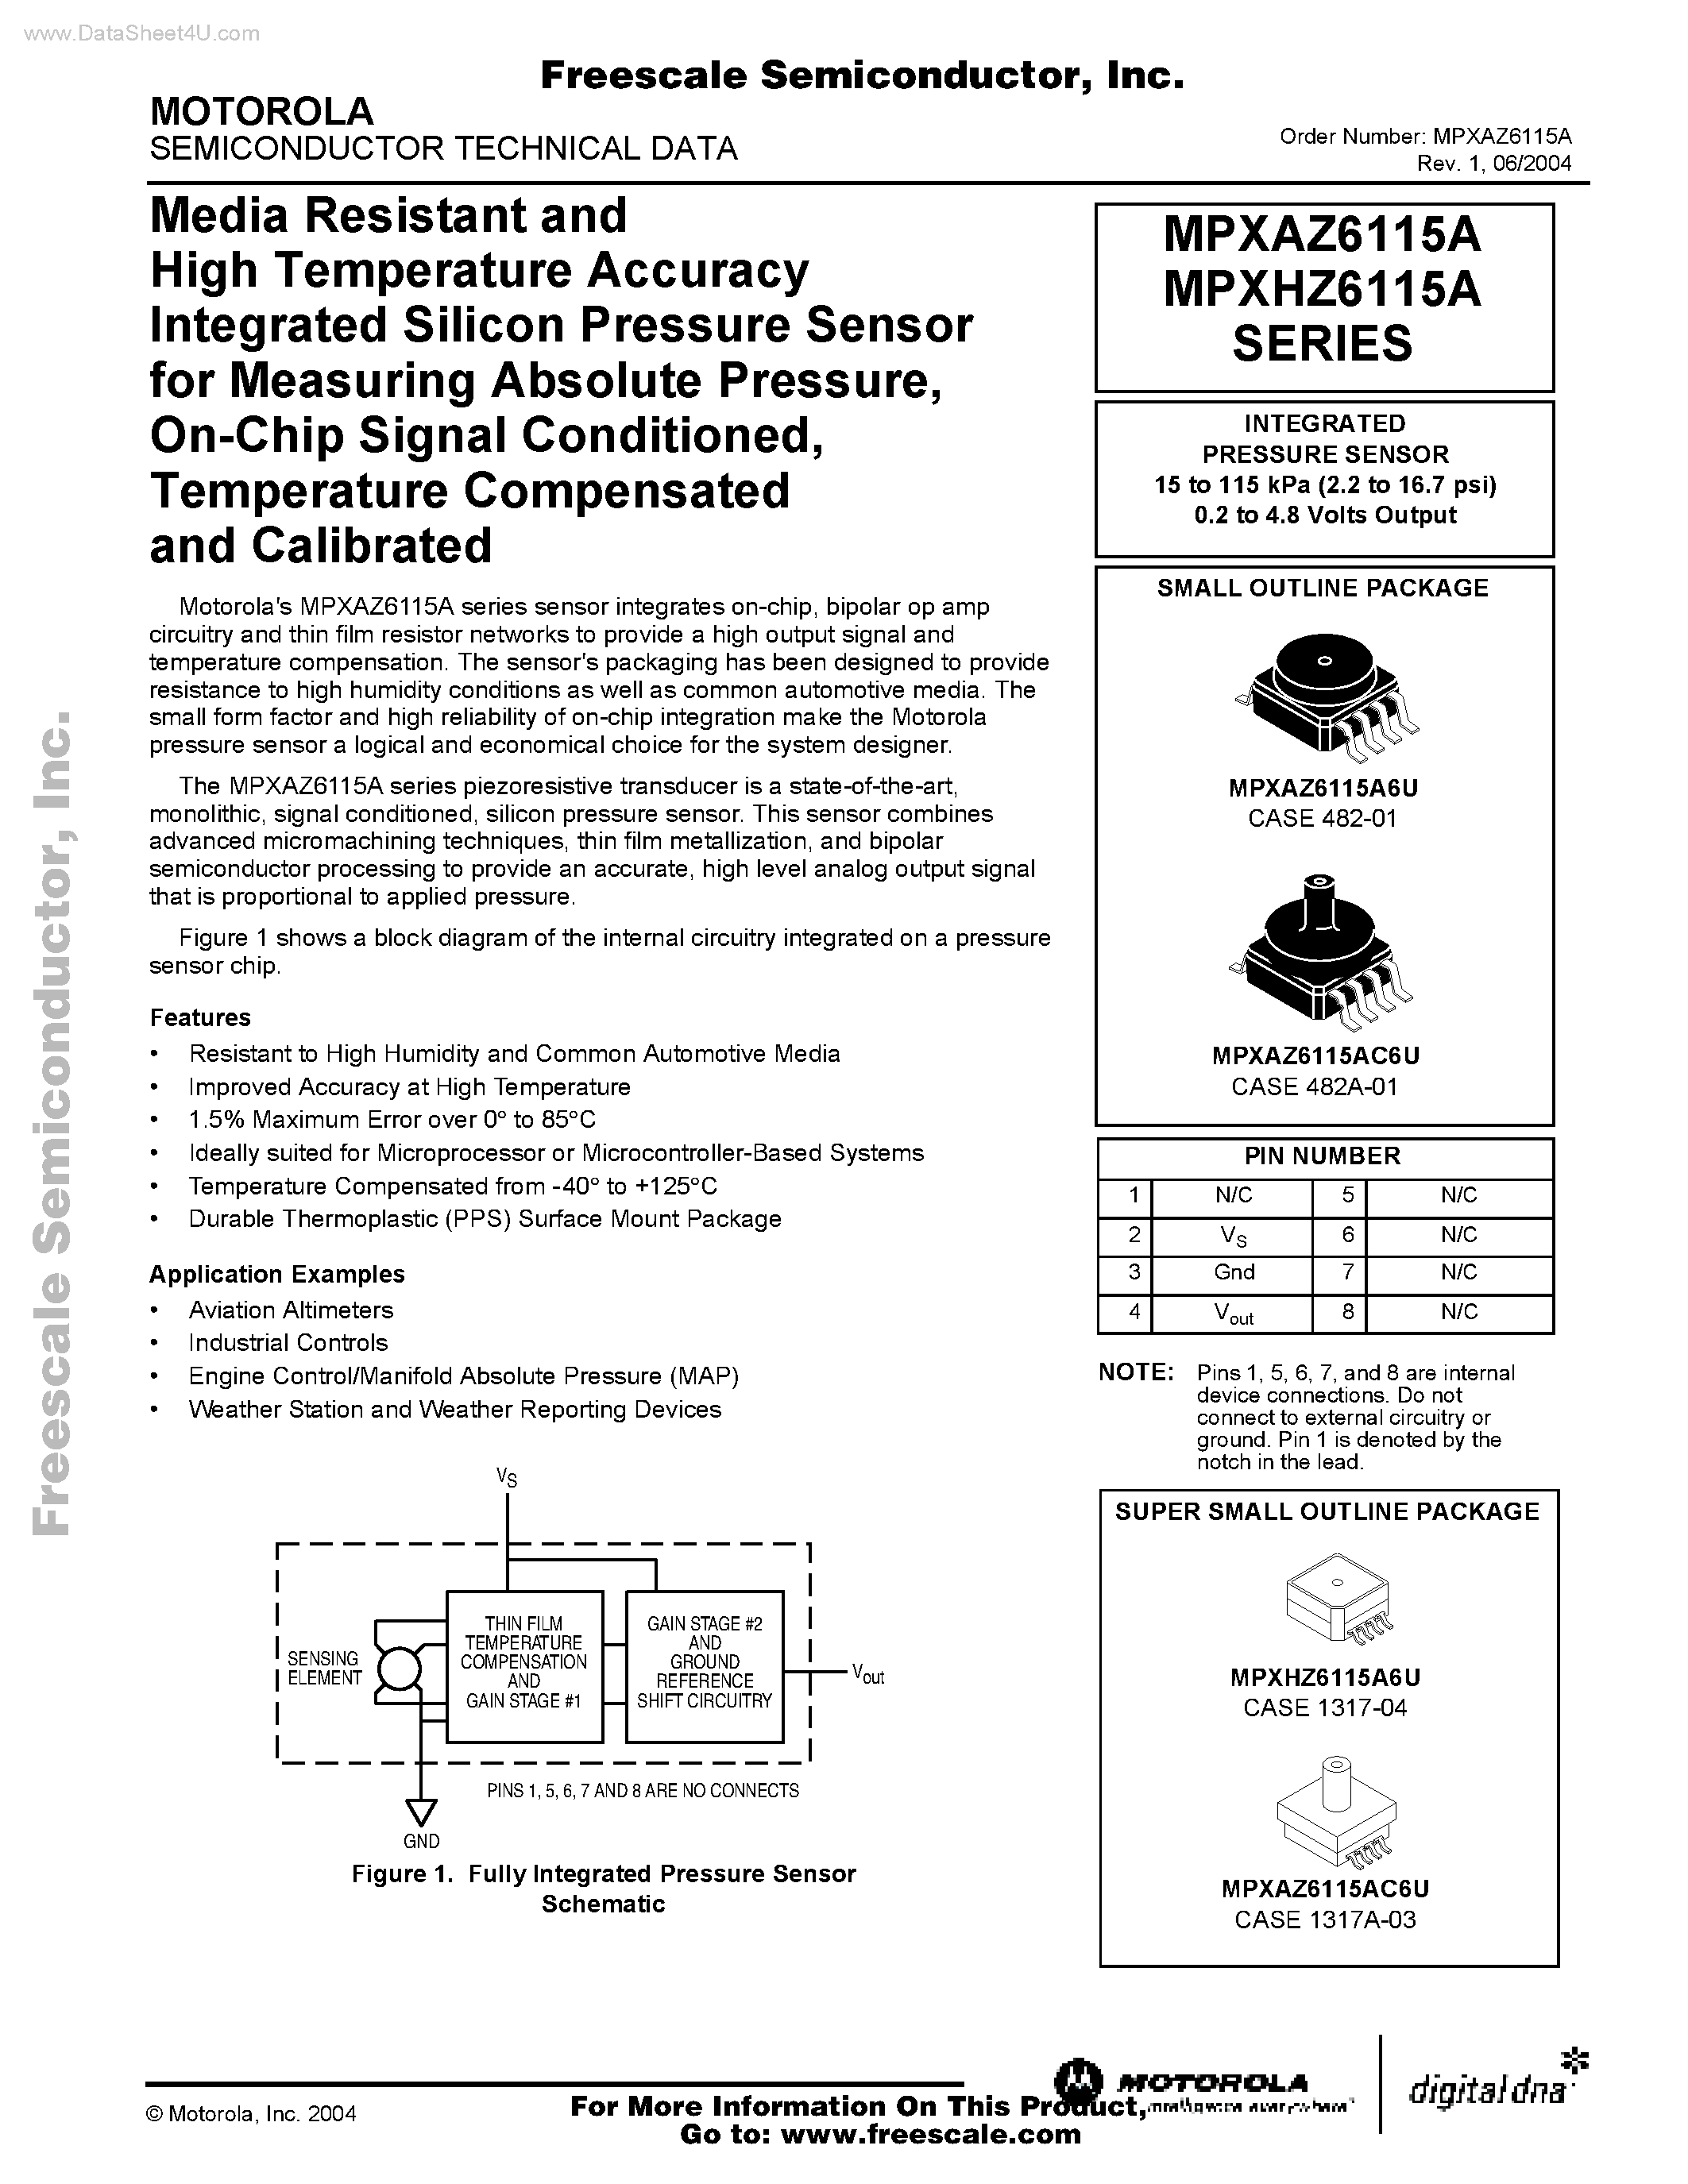 Datasheet MPXHA6115A - (MPXHZ6115A / MPXHA6115A) Media Resistant and High Temperature Accuracy Integrated Silicon Pressure Sensor page 1